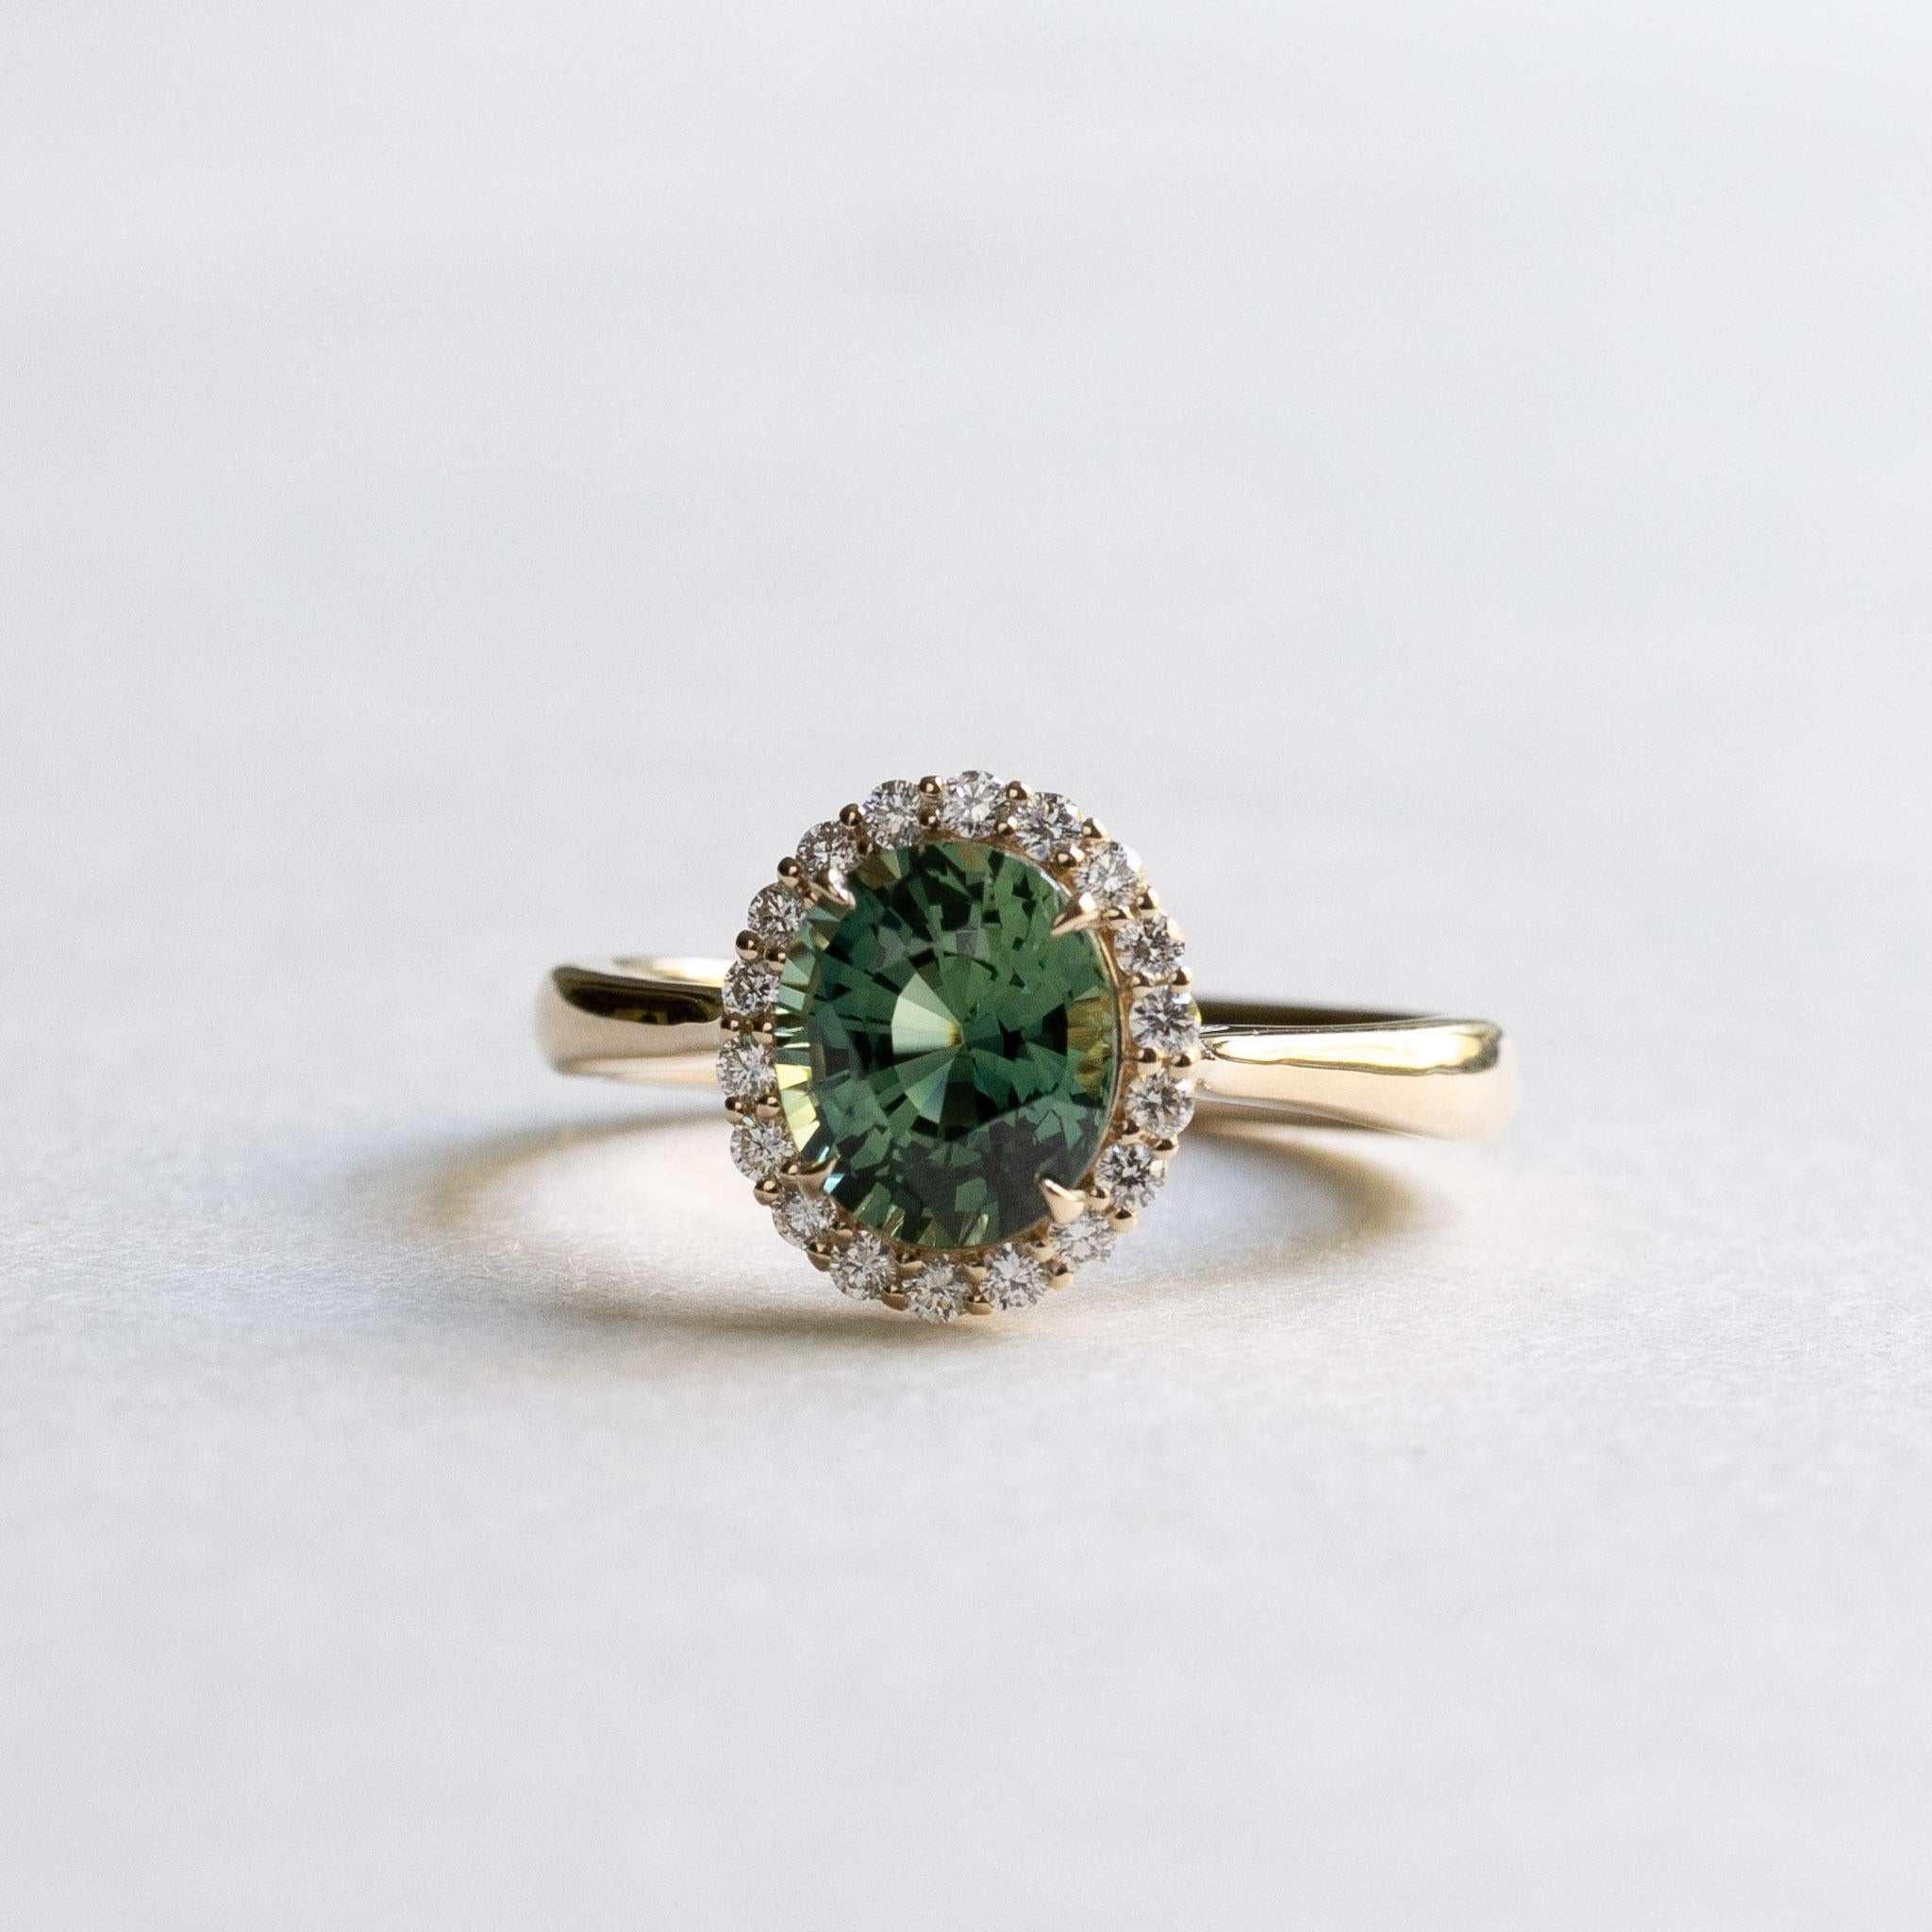 Green sapphire adorned with diamond halo. 

Metal: 14K Yellow Gold
Stone: Green Parti Sapphire
Stone Weight: 2 Carat 
Stone Shape: Oval 
Stone Size: 6mm x 8mm 
Accent Stone: Round Diamond
Diamond Color and Clarity: G+, VS
Stone Size: 1.5mm
Total